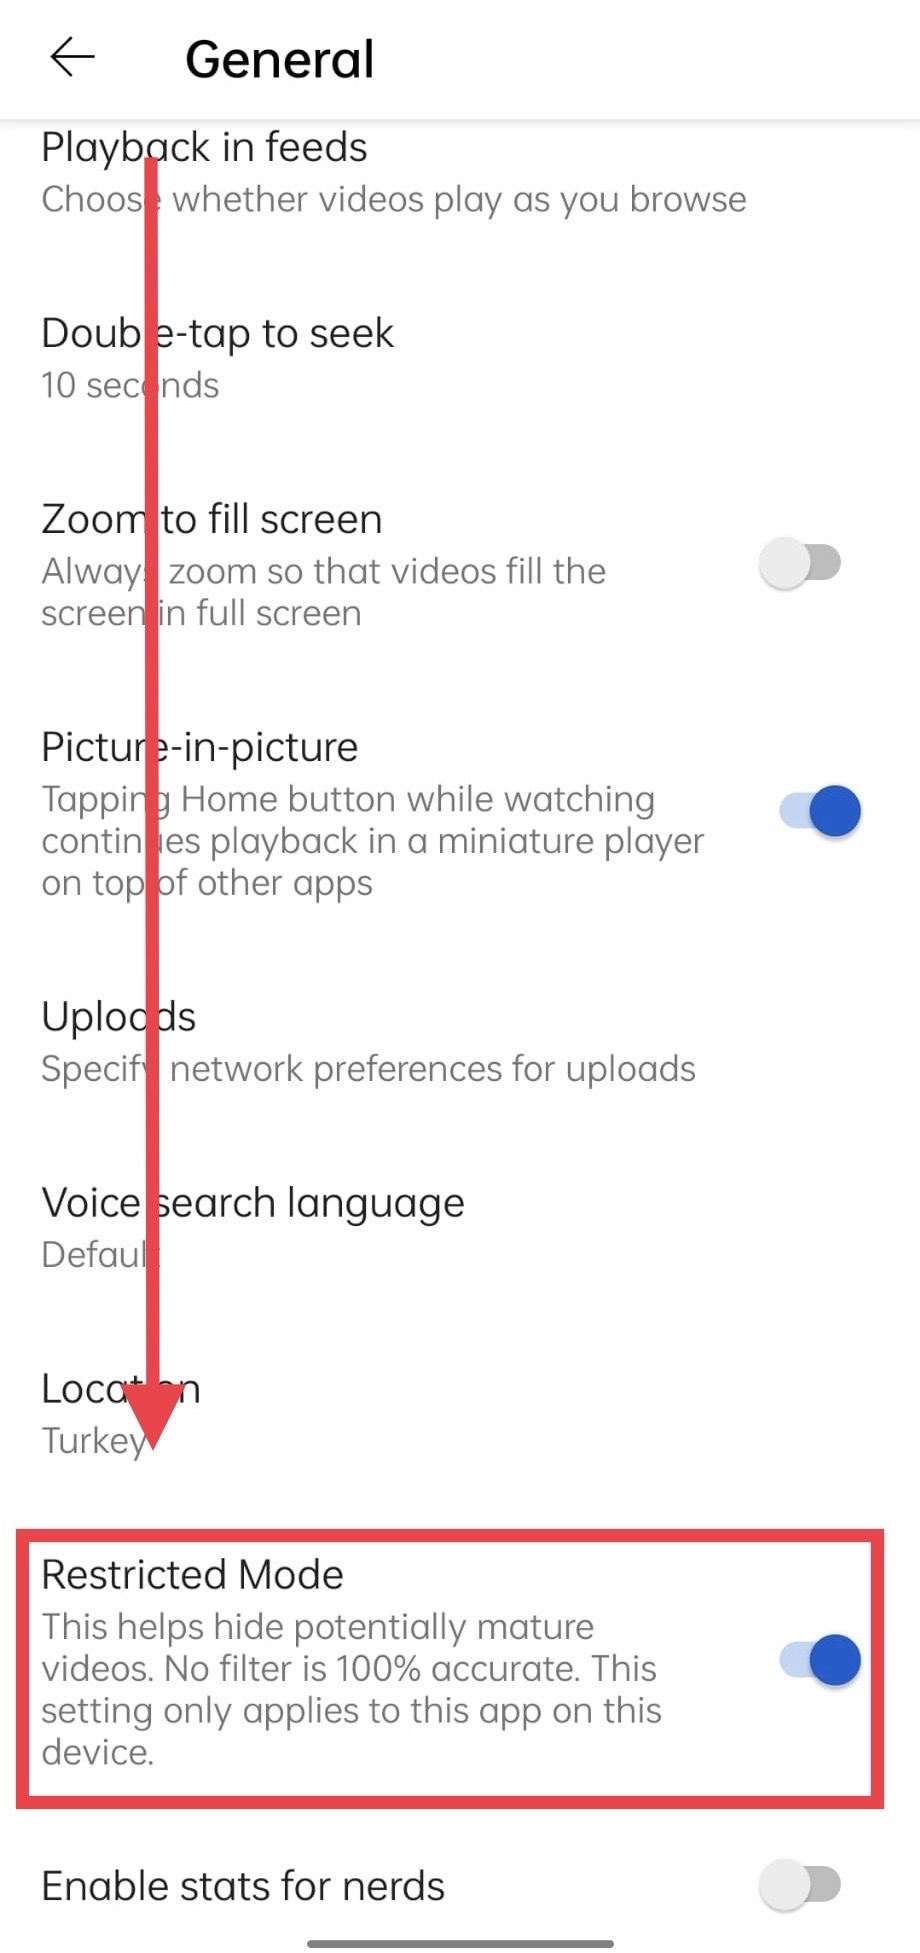 Parental Control Enabling Restricted Mode in YouTube Application